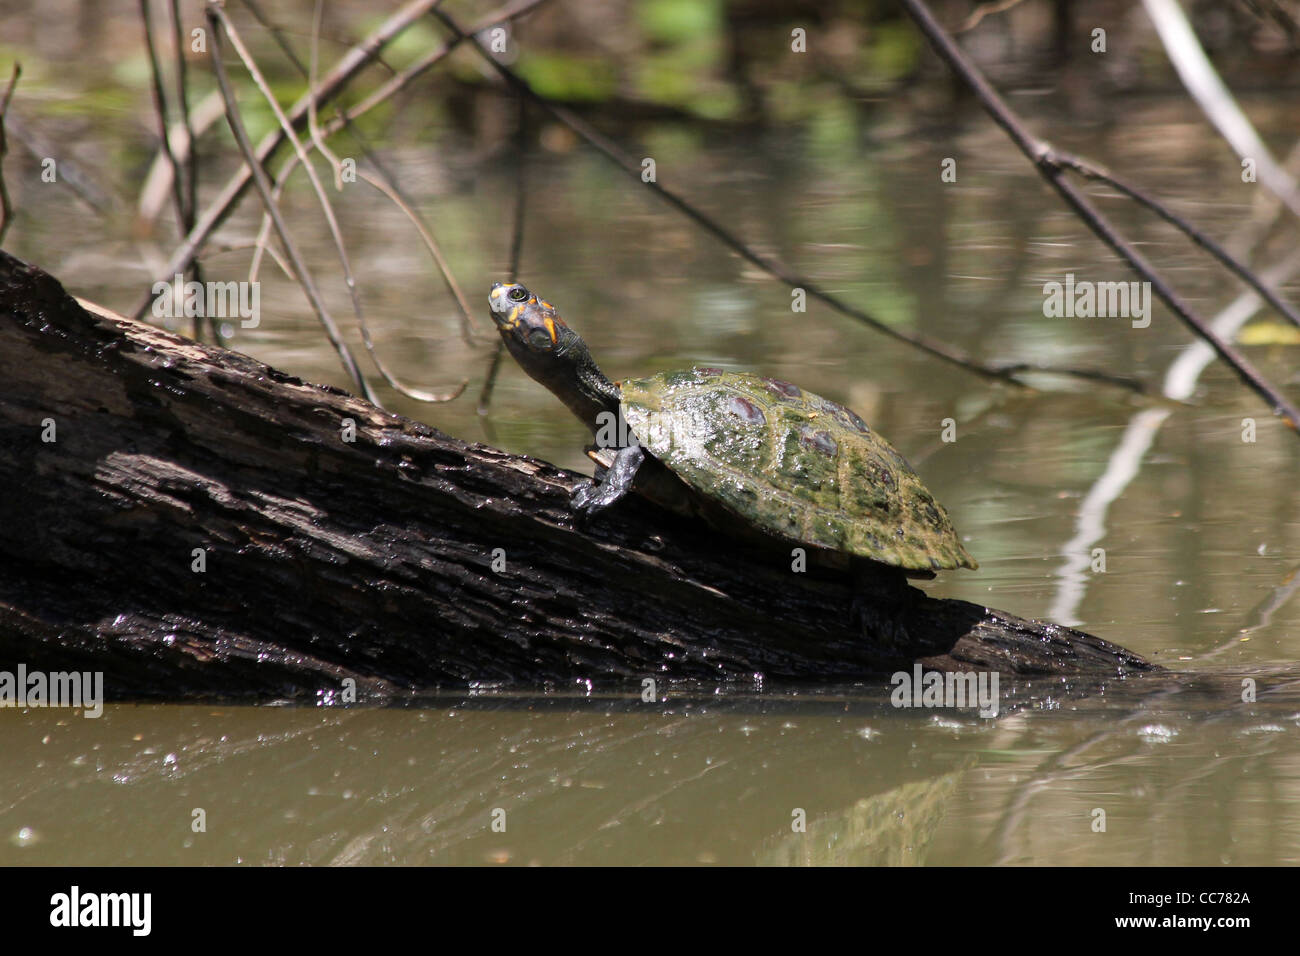 A Yellow-spotted Amazon River Turtle (Podocnemis unifilis) basking on a log in the Peruvian Amazon Stock Photo